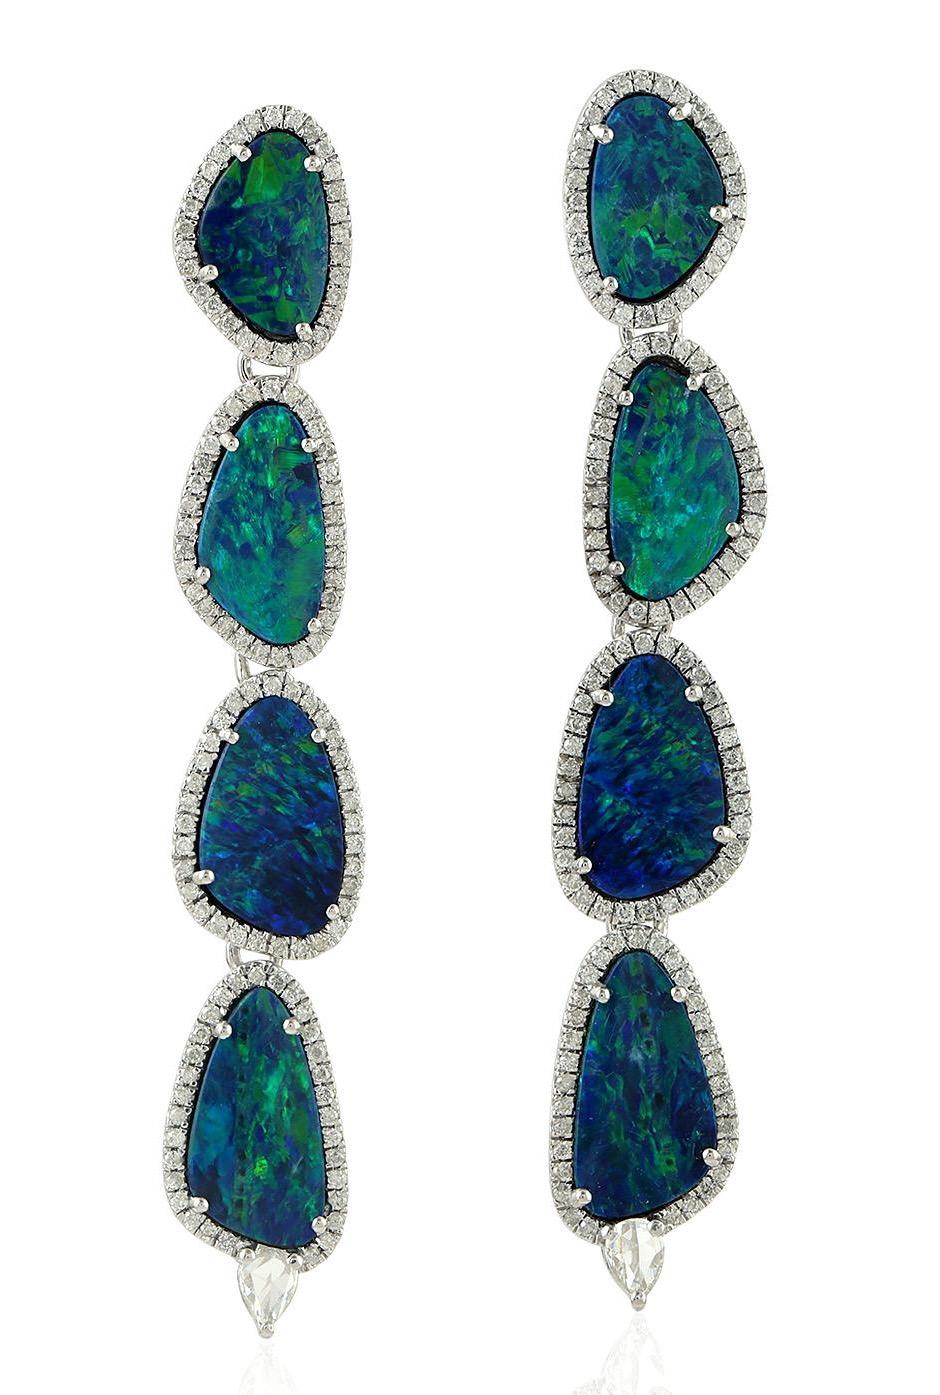 Handcrafted from 18-karat gold, these exquisite earrings are set with 11.7 carats Opal doublet and 1.11 carats of glimmering diamonds.

FOLLOW  MEGHNA JEWELS storefront to view the latest collection & exclusive pieces.  Meghna Jewels is proudly